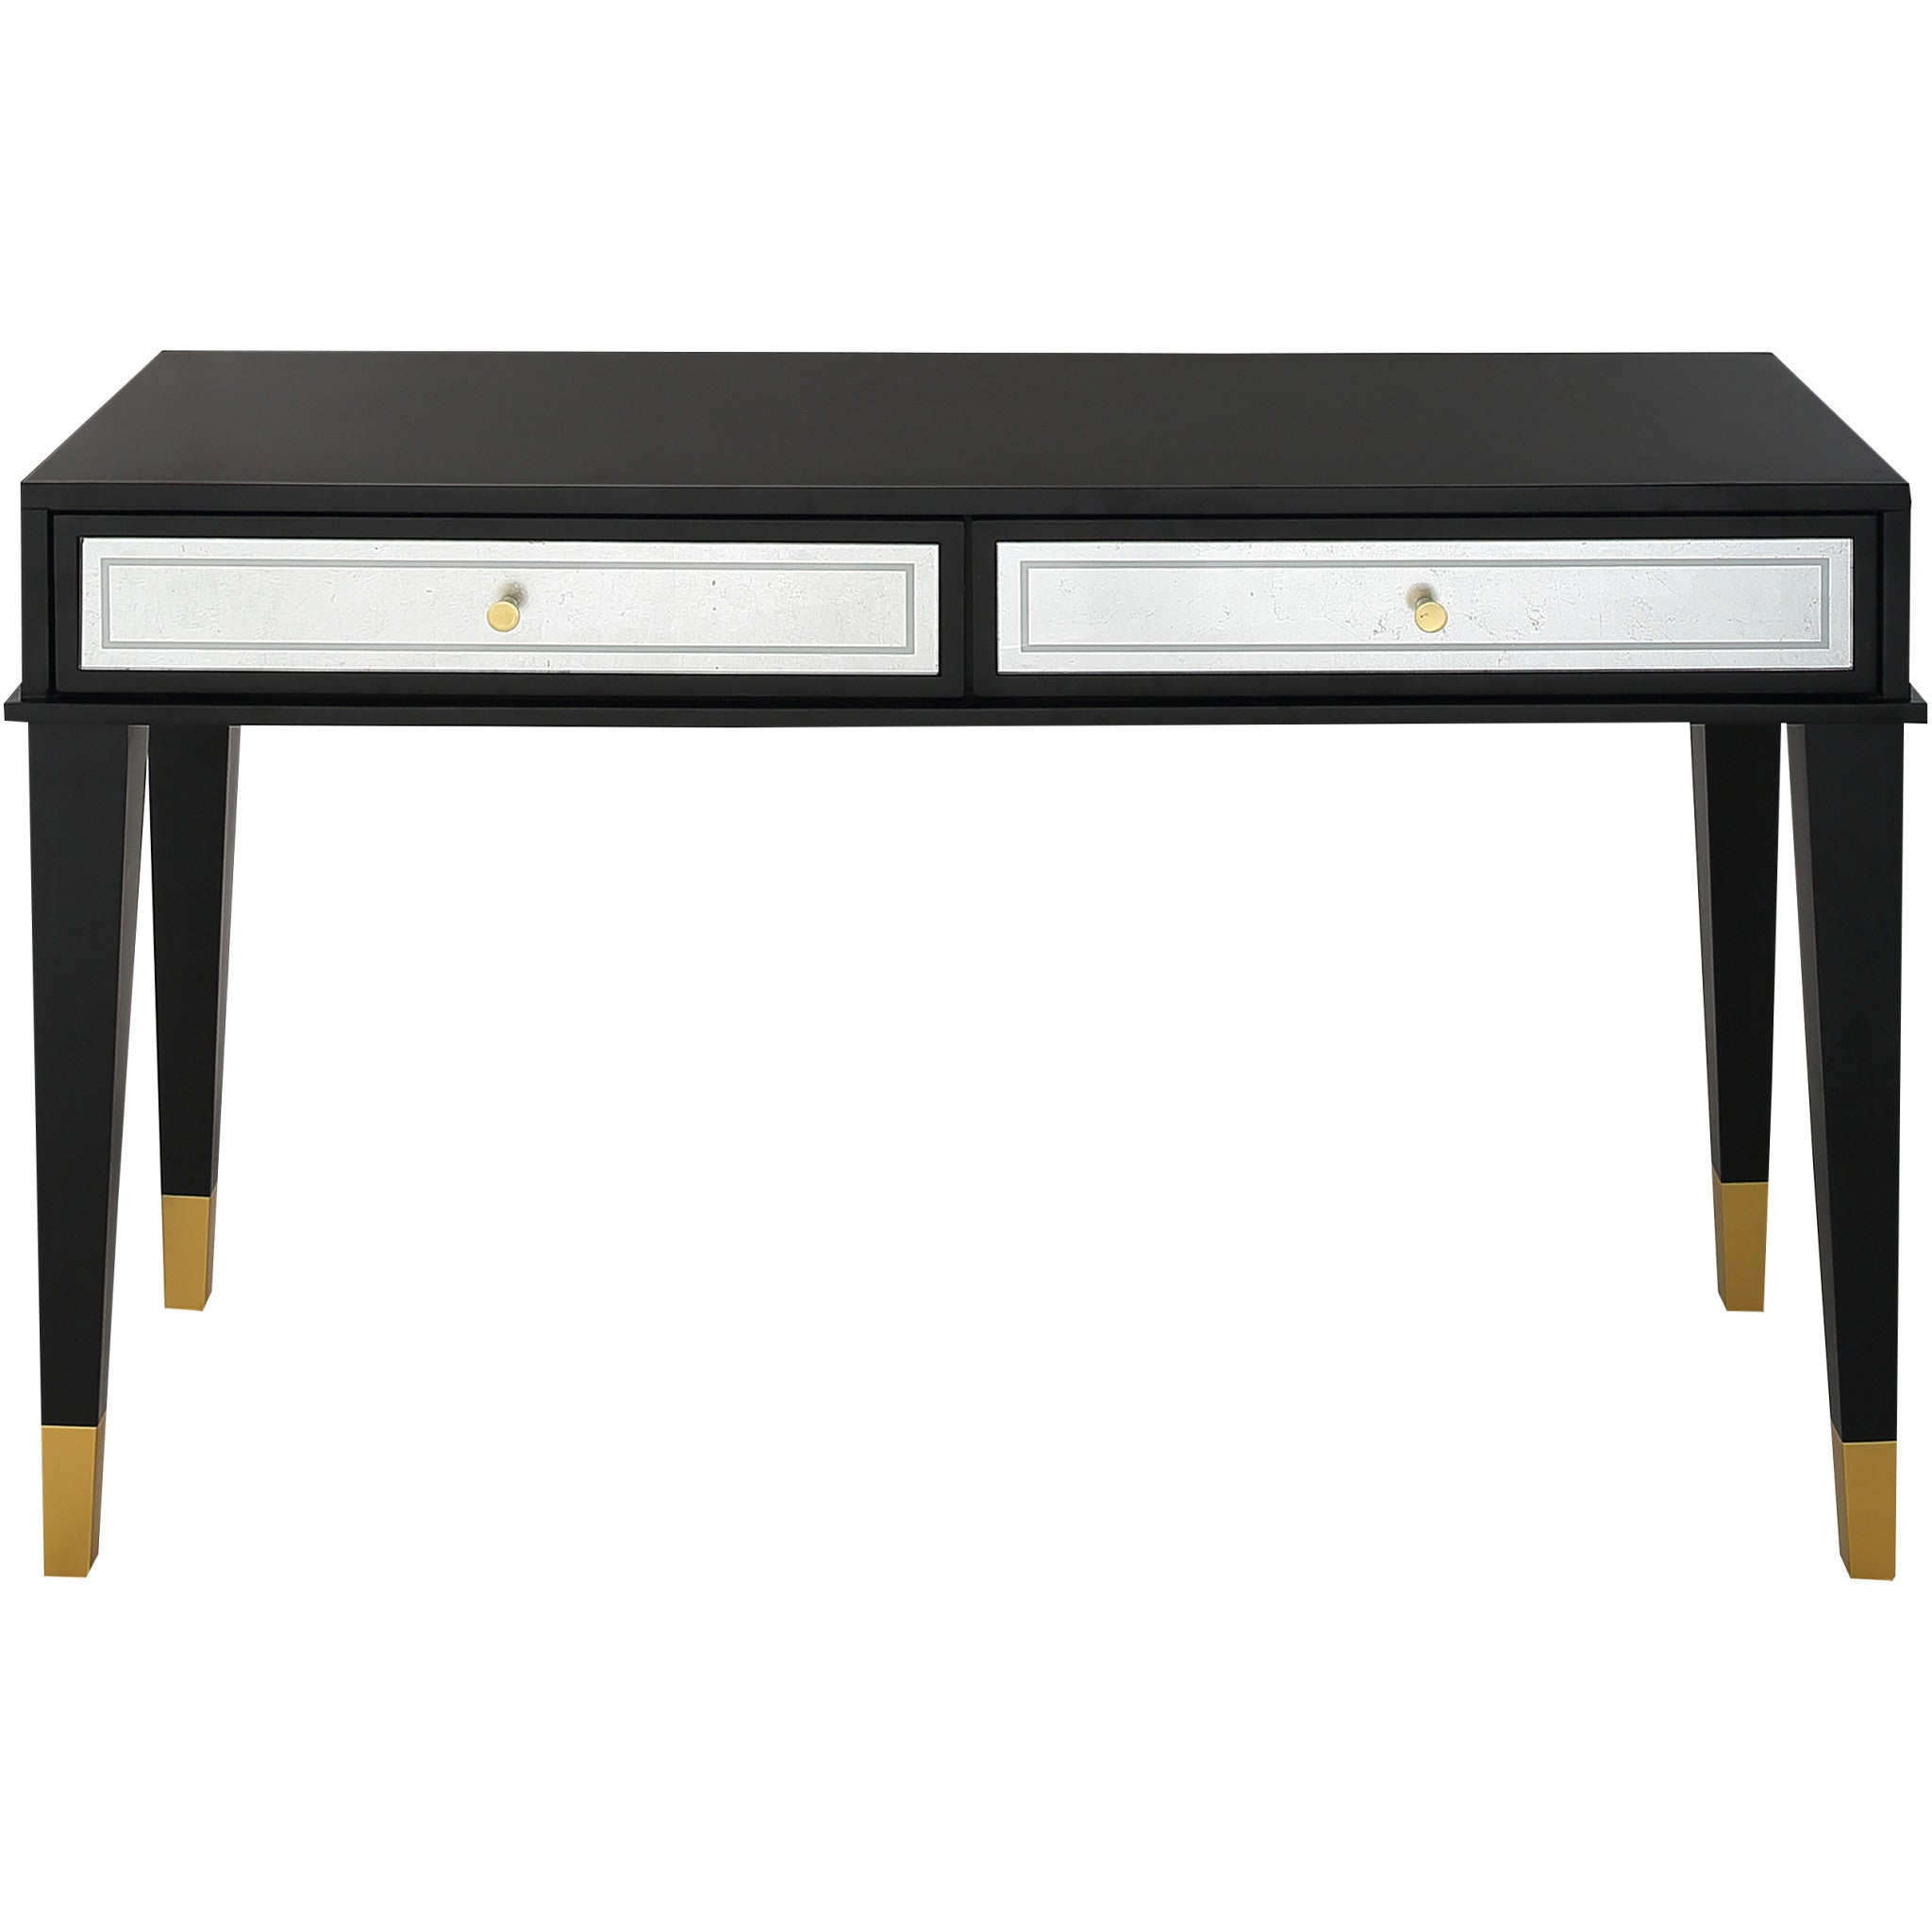 47" Black and Black and Gold Console Table With Storage